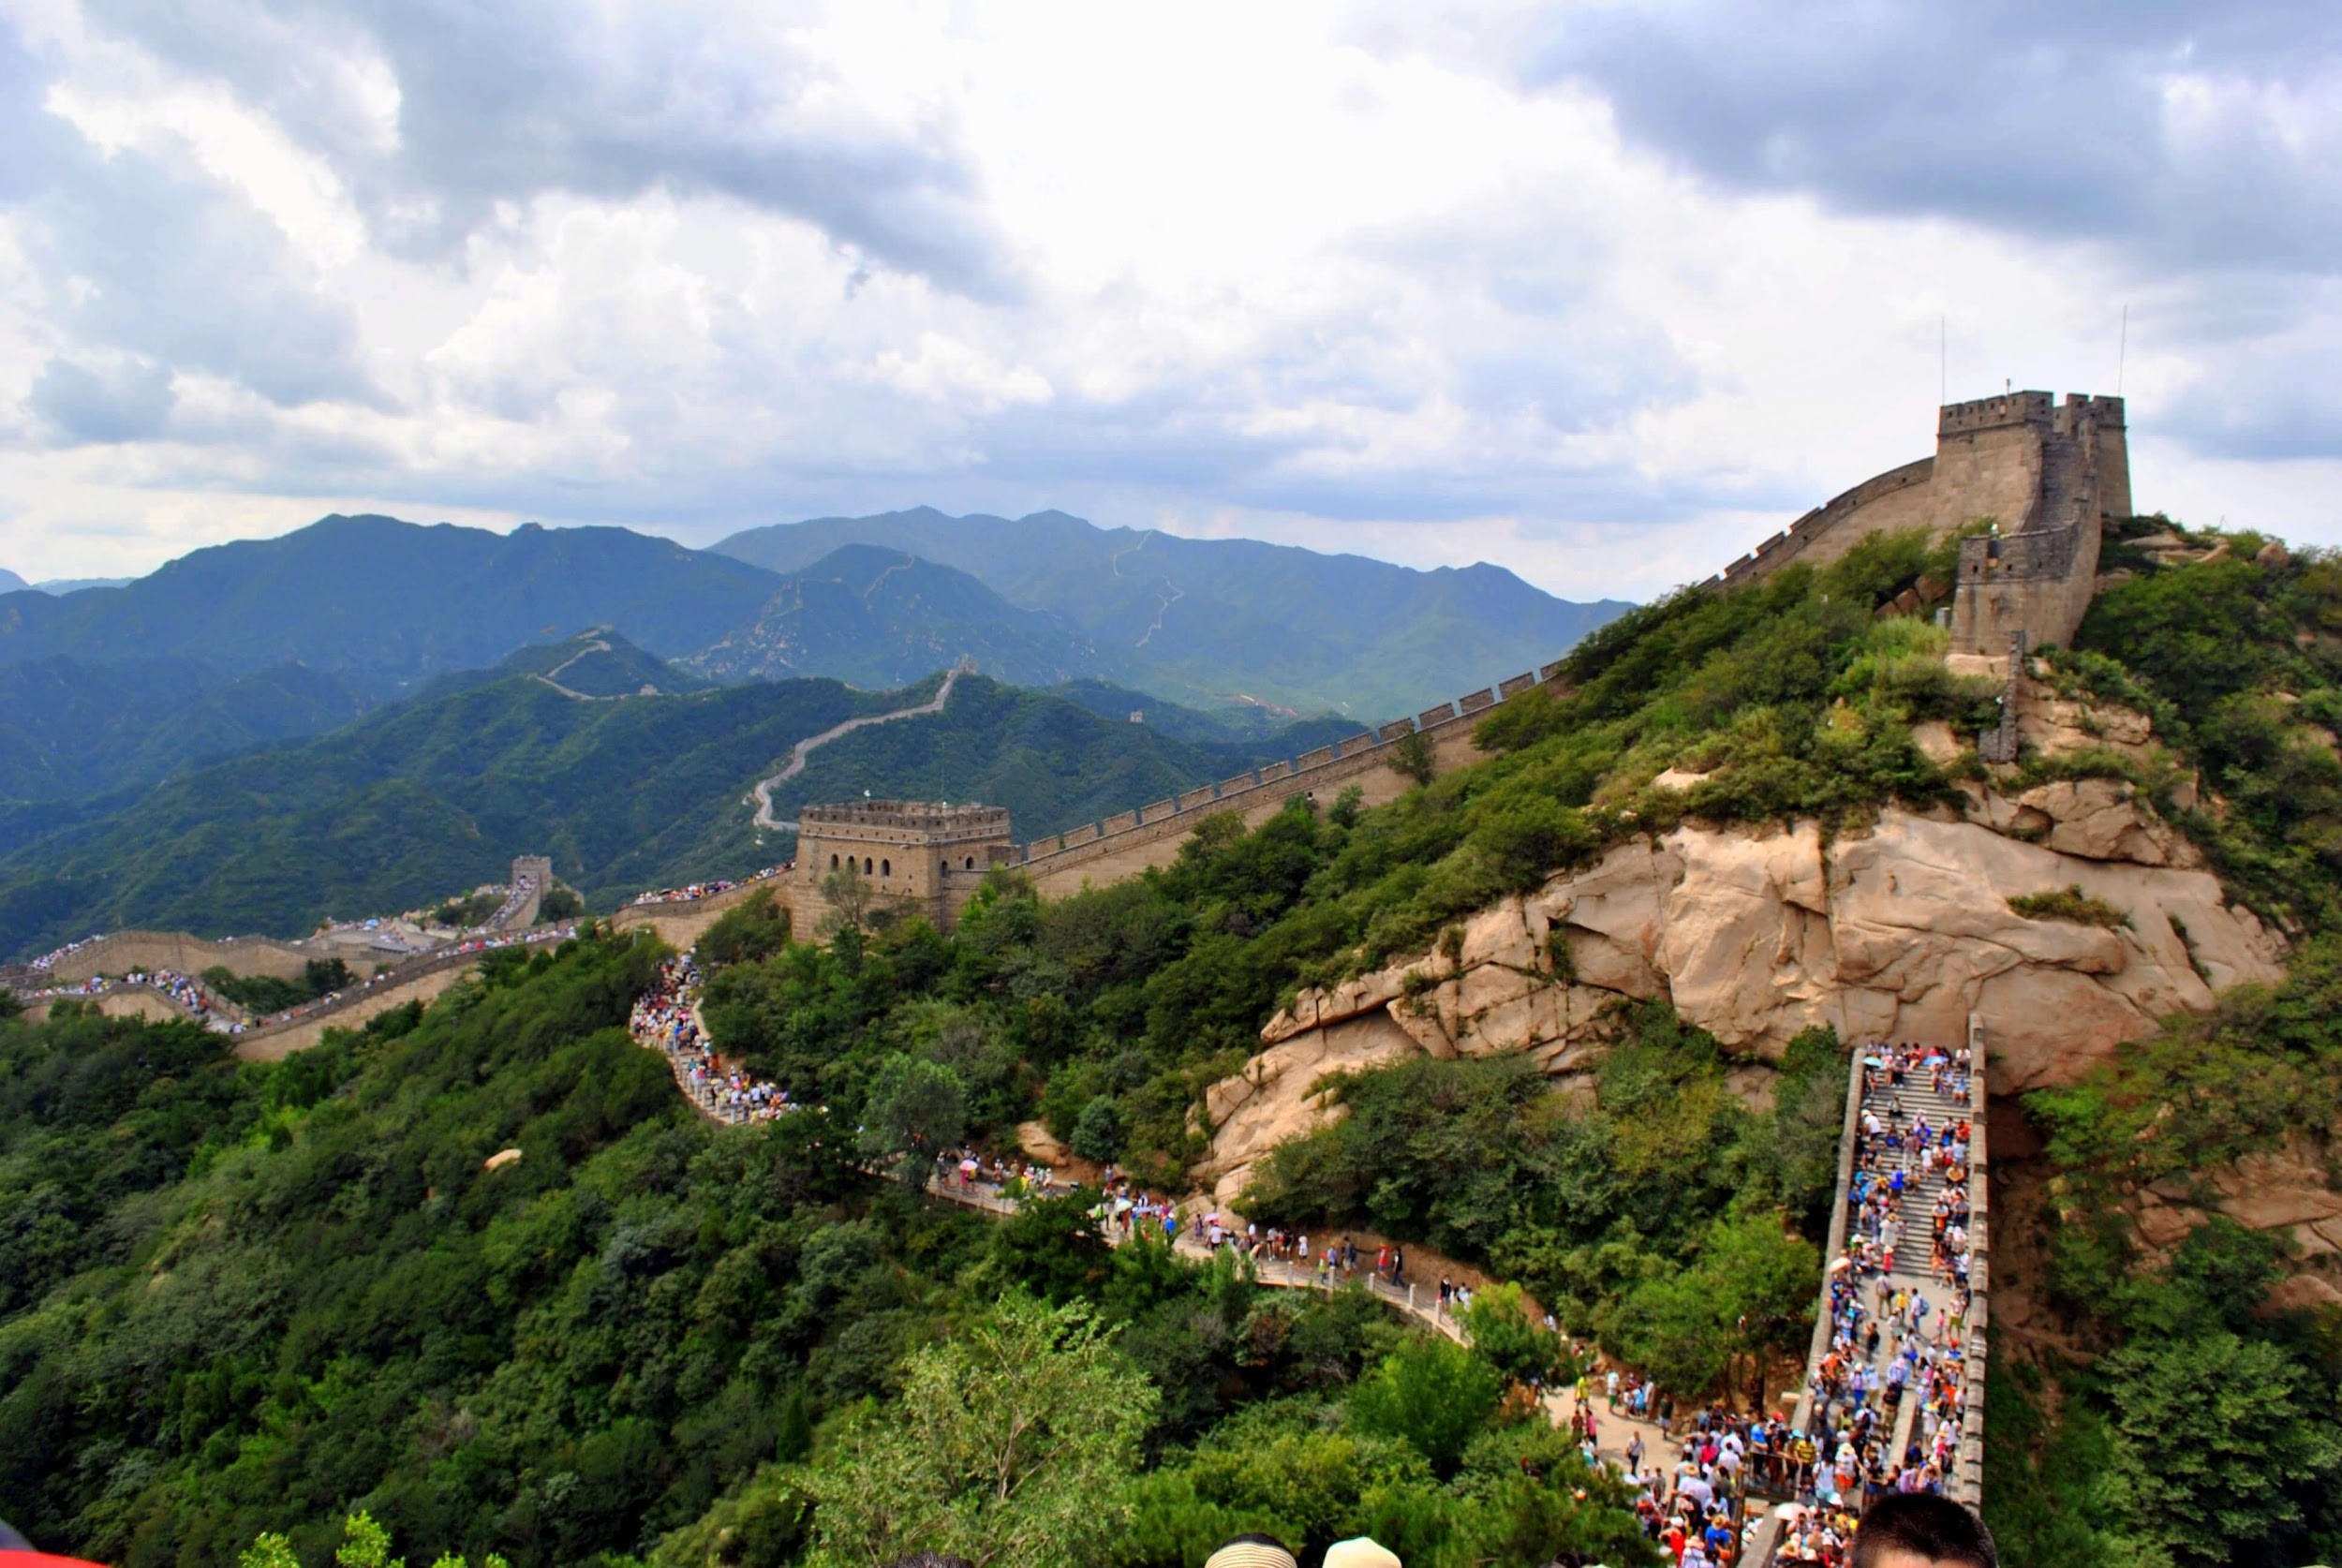 Top 3 China tour packages for 2019